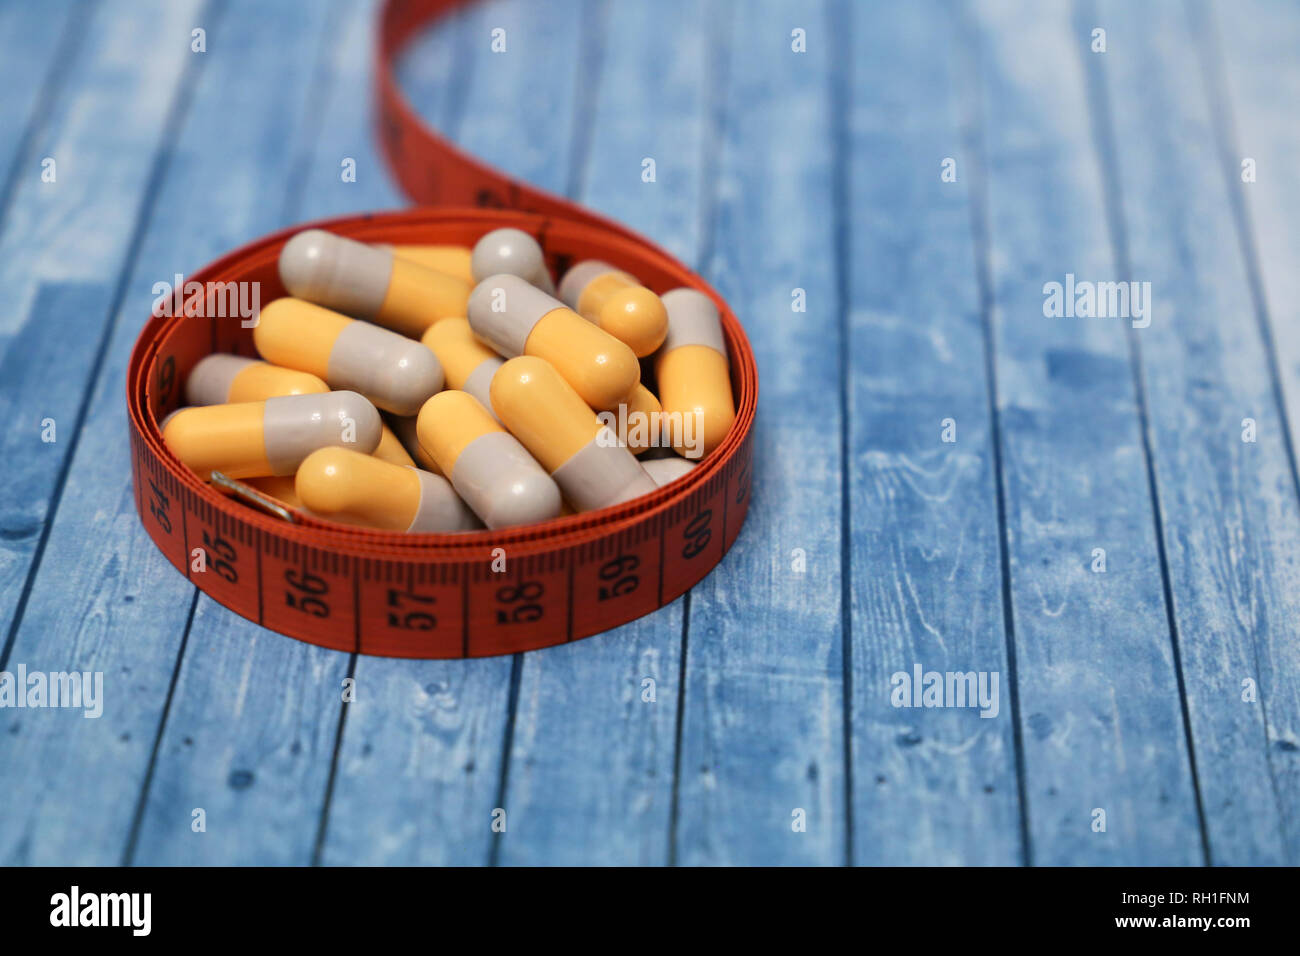 Diet pills, weight loss remedy. Medication in capsules and measuring tape on wooden table Stock Photo